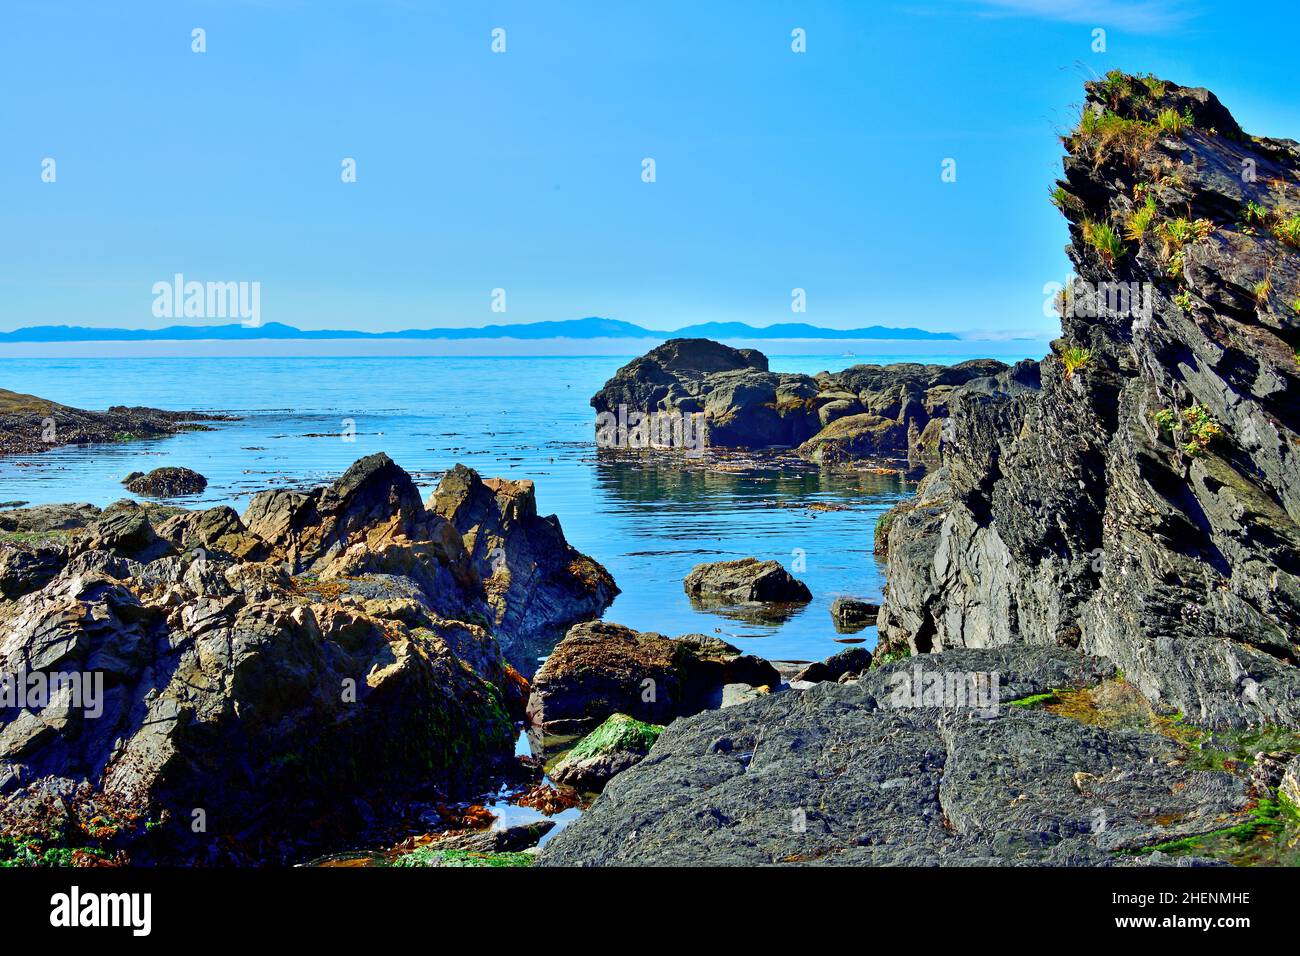 A landscape image of the rugged west coast of Vancouver Island looking toward the Pacific Ocean. Stock Photo